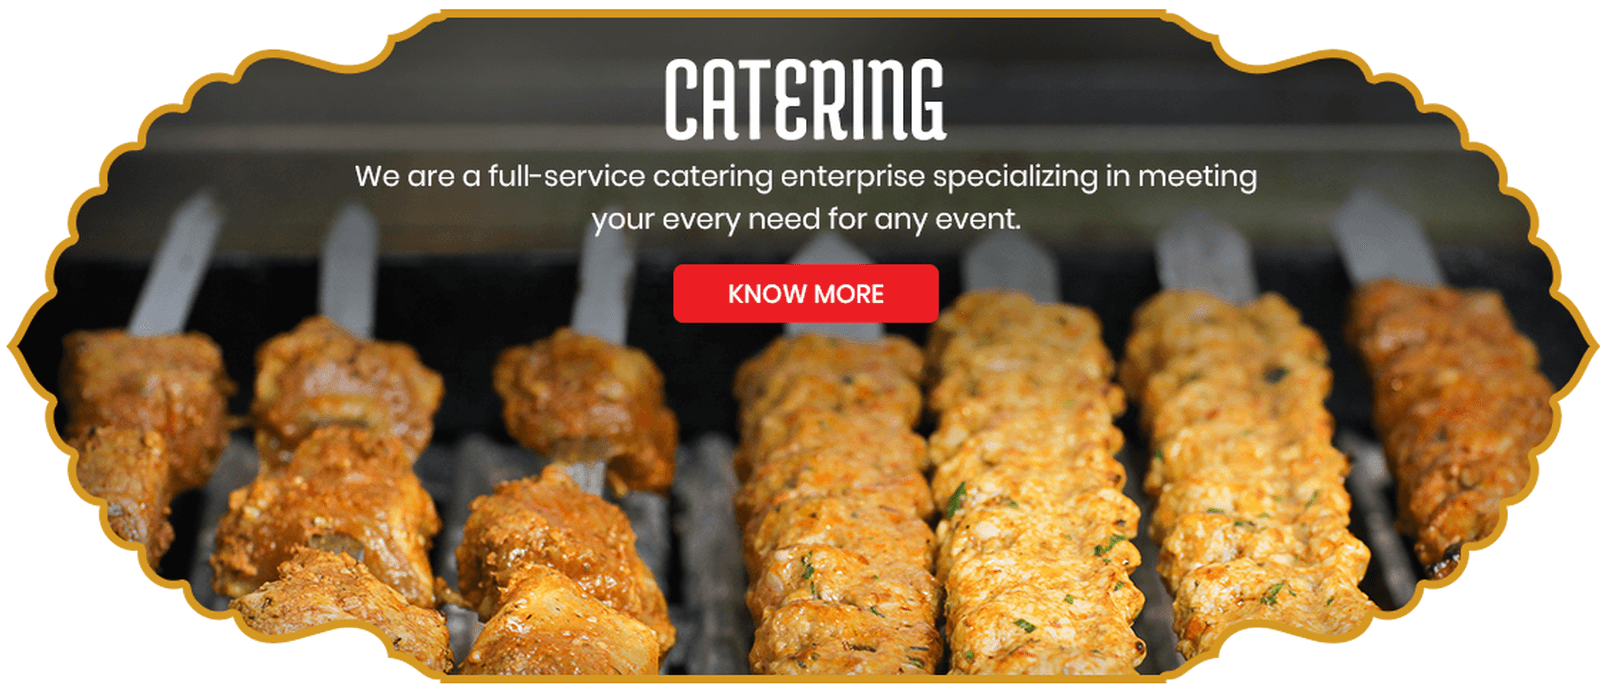 We are a Full-Service Catering Enterprise Specializing in Meeting Your Every Need for any Event